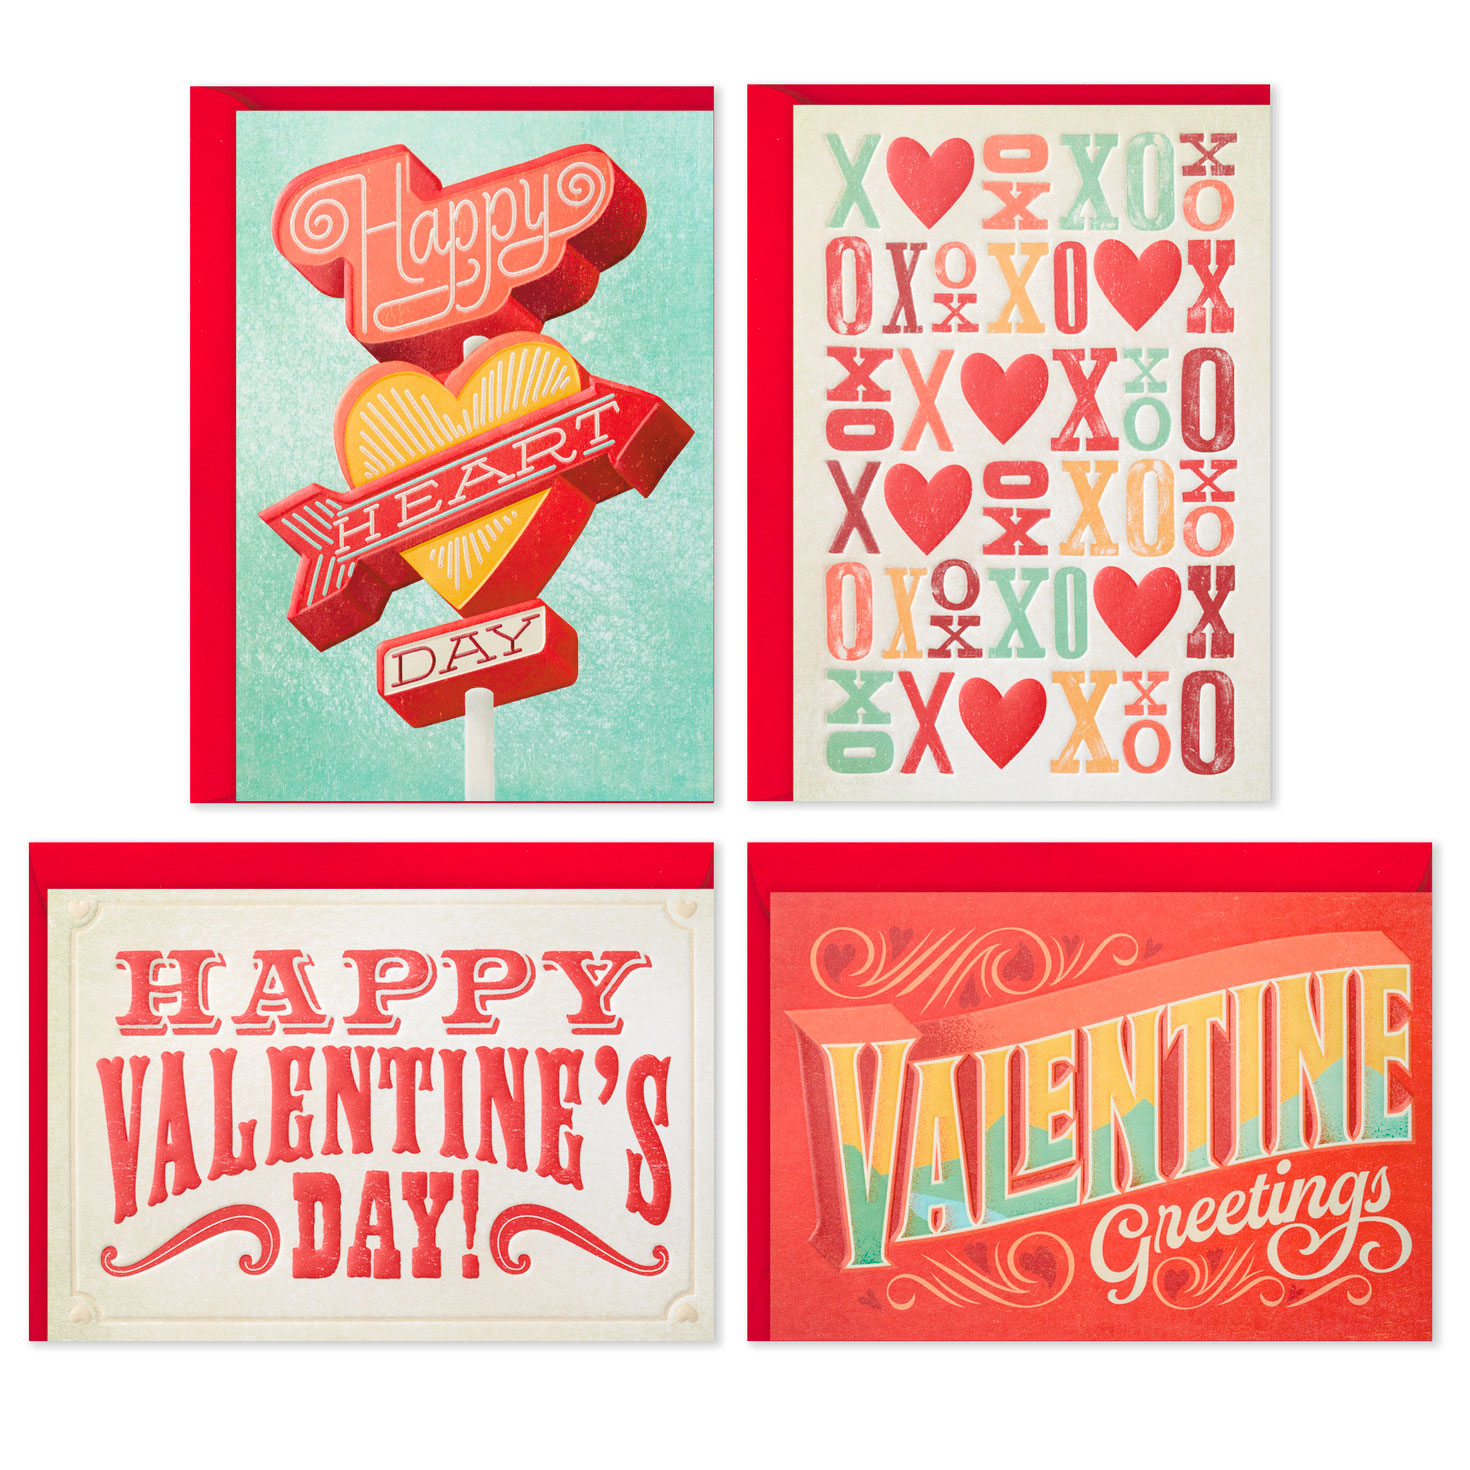 Vintage Signs Assorted Valentine's Day Cards, Pack of 24 - Boxed